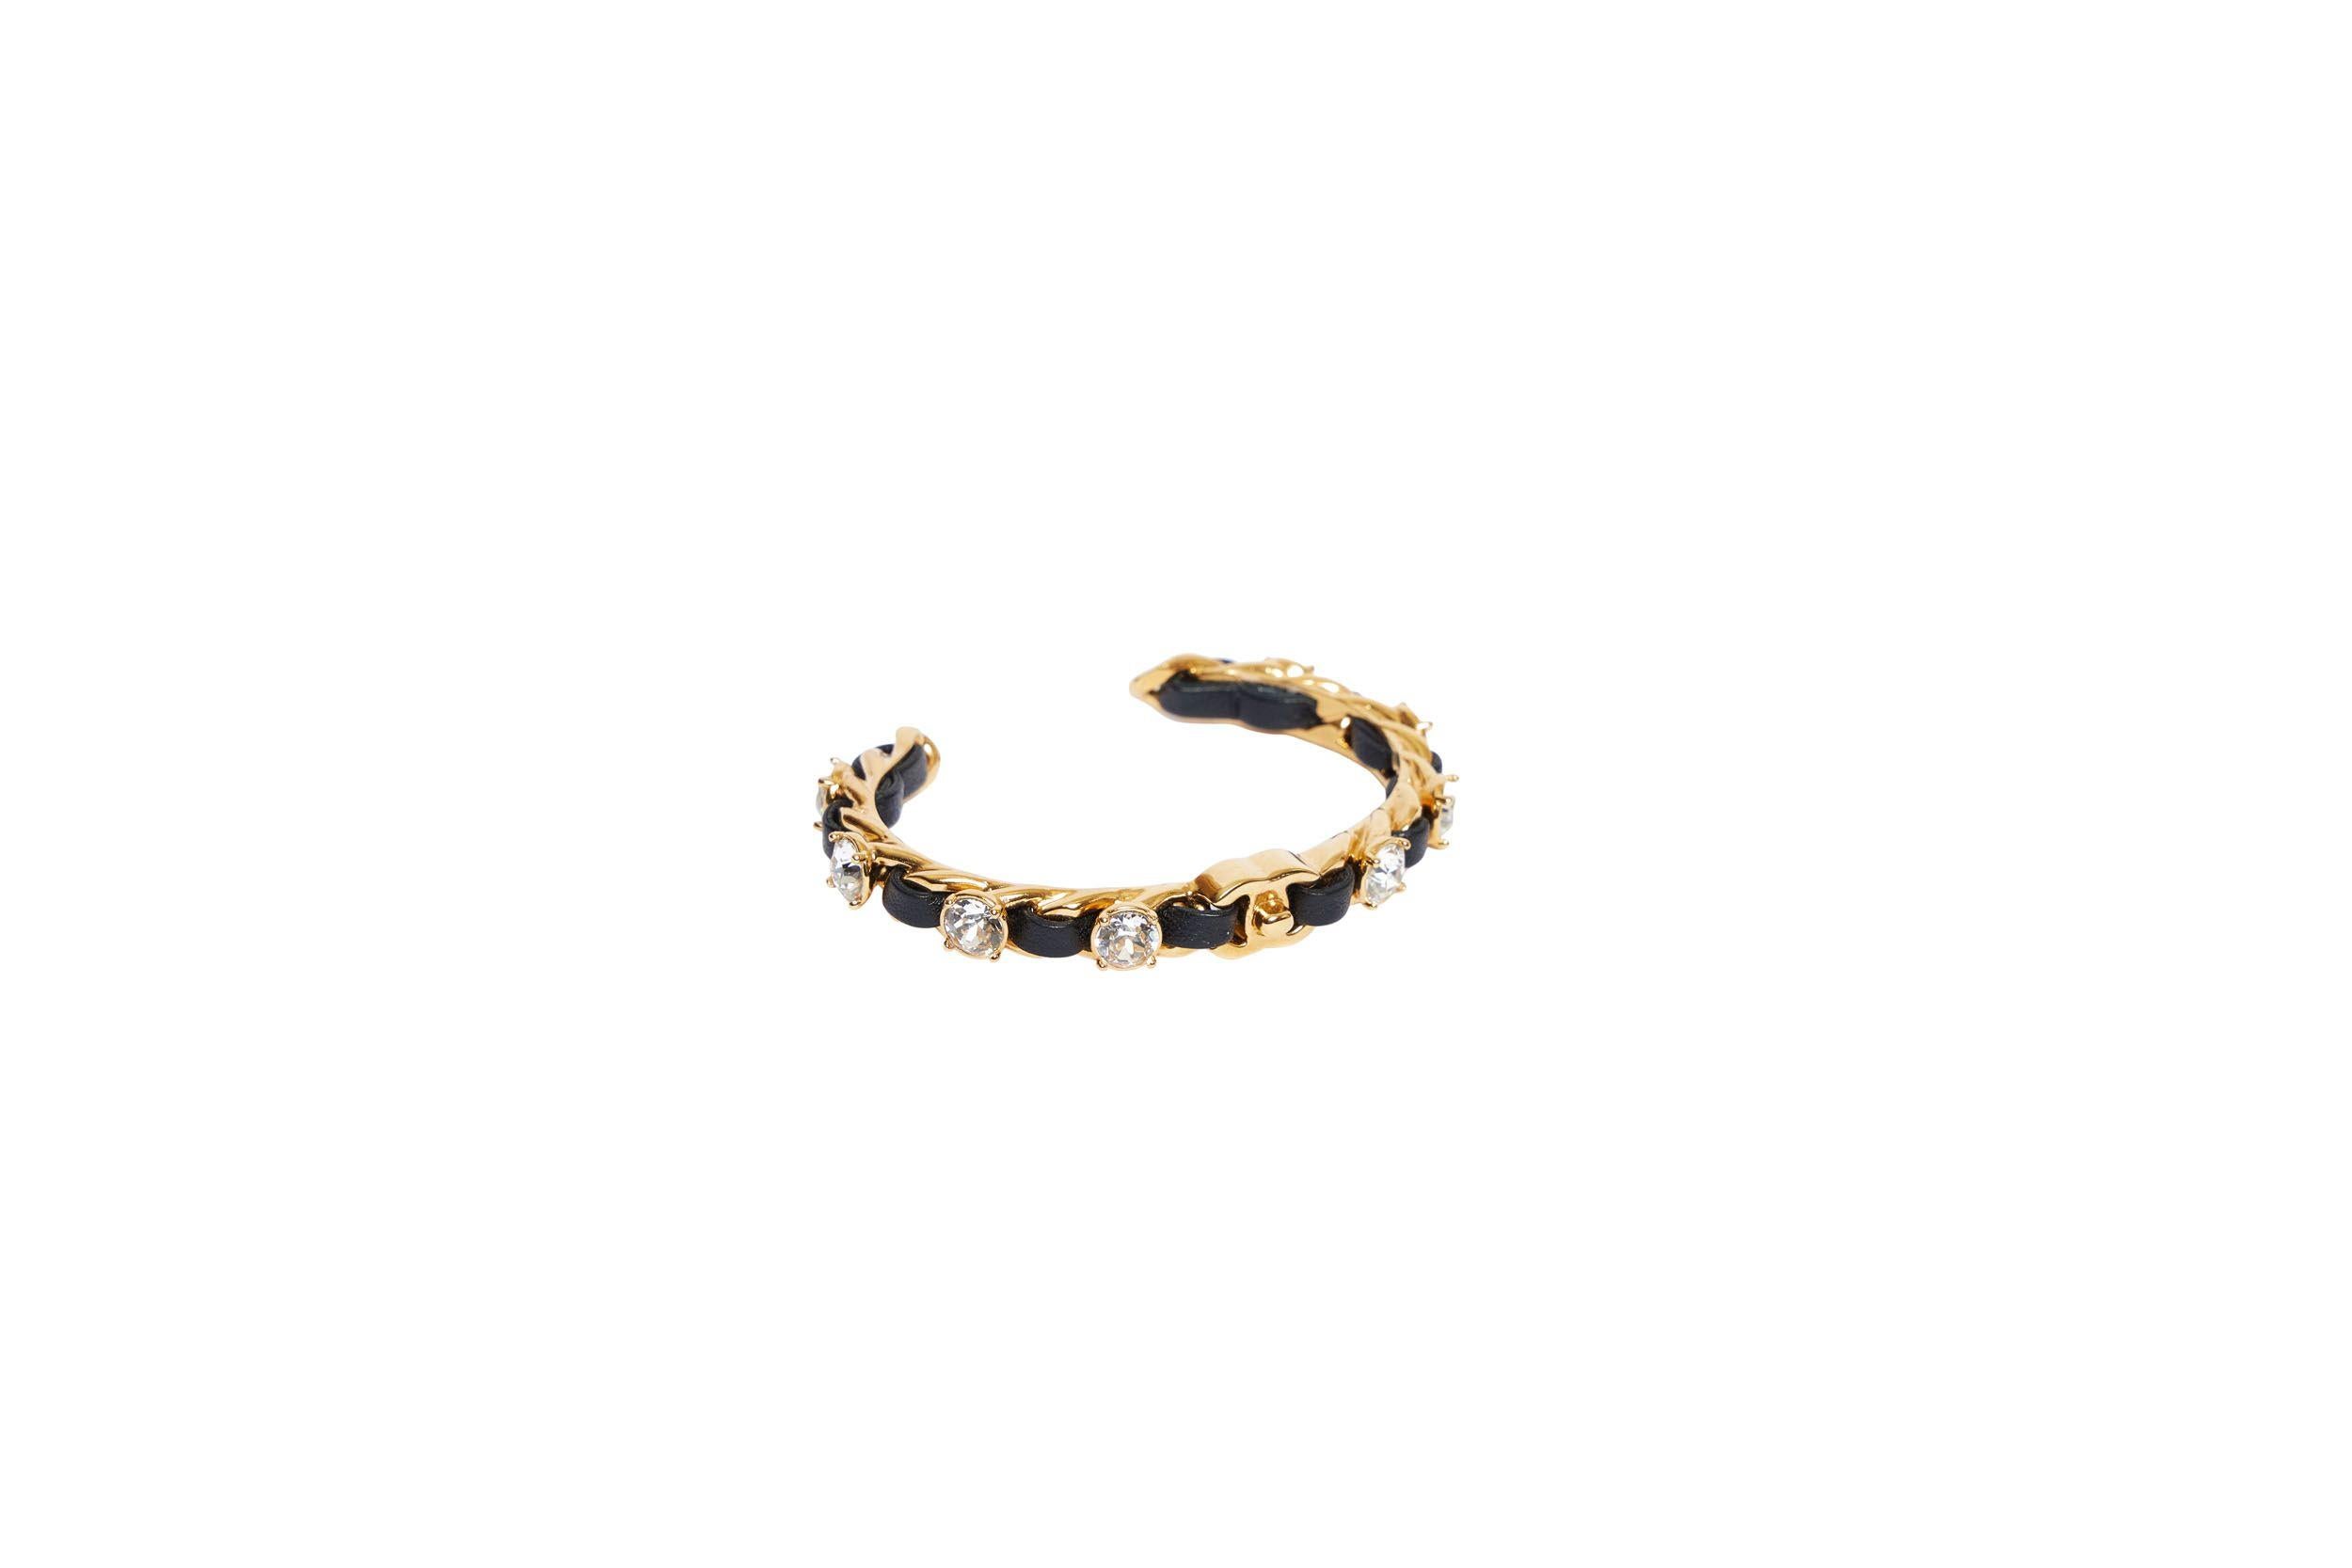 Chanel new gold chain cuff with black woven leather and rhinestones. Opening 1